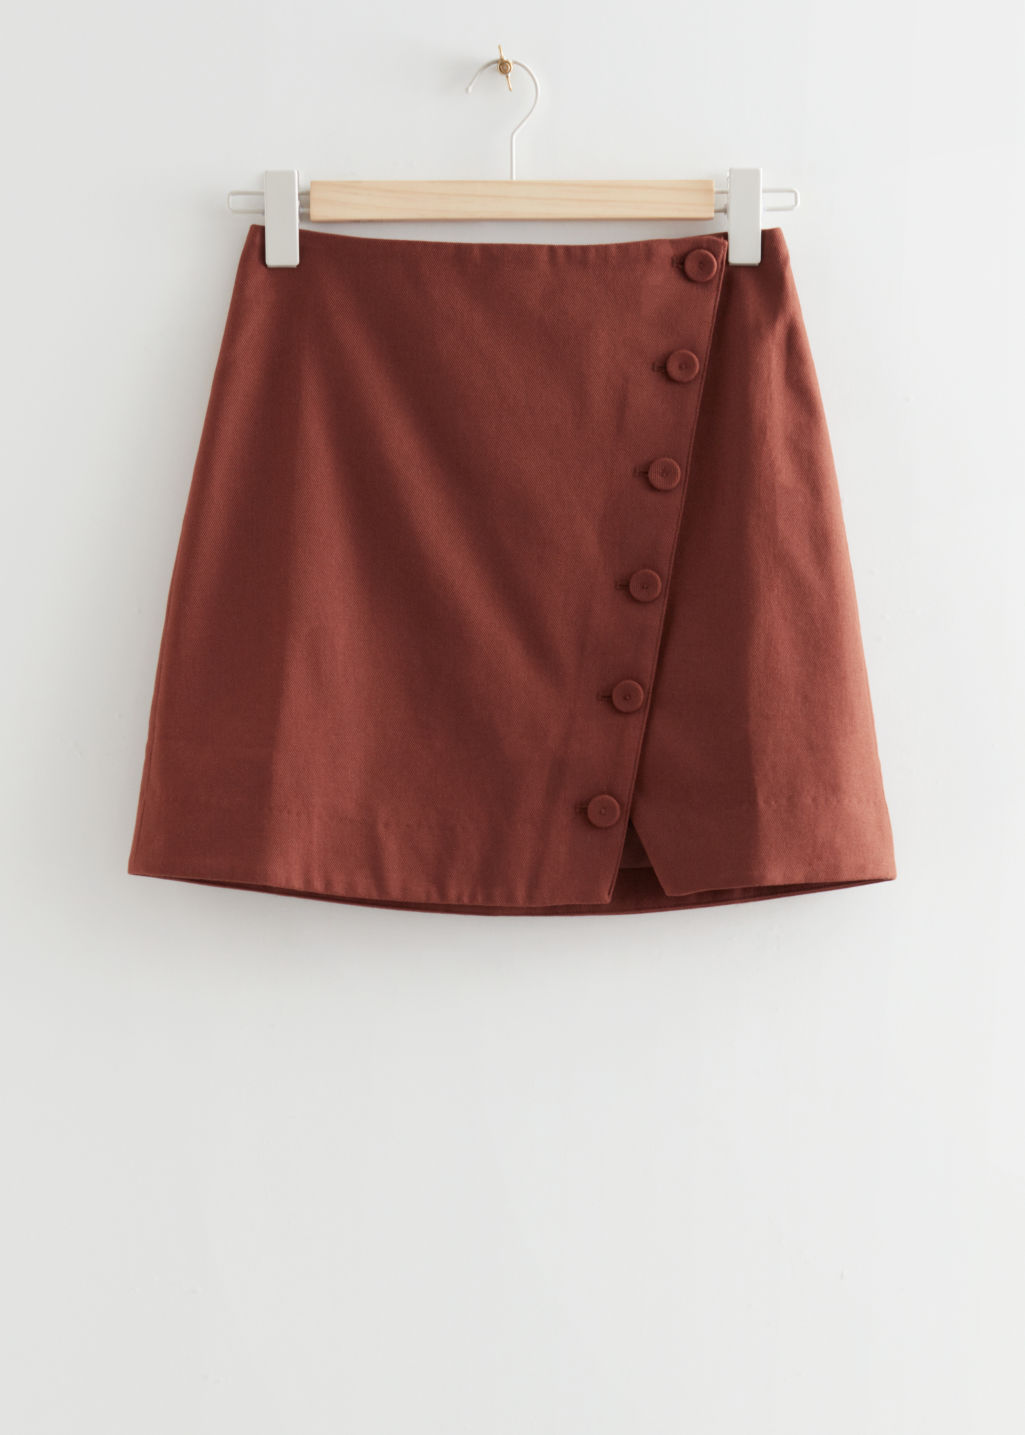 & Other Stories Buttoned Wrap Mini Skirt